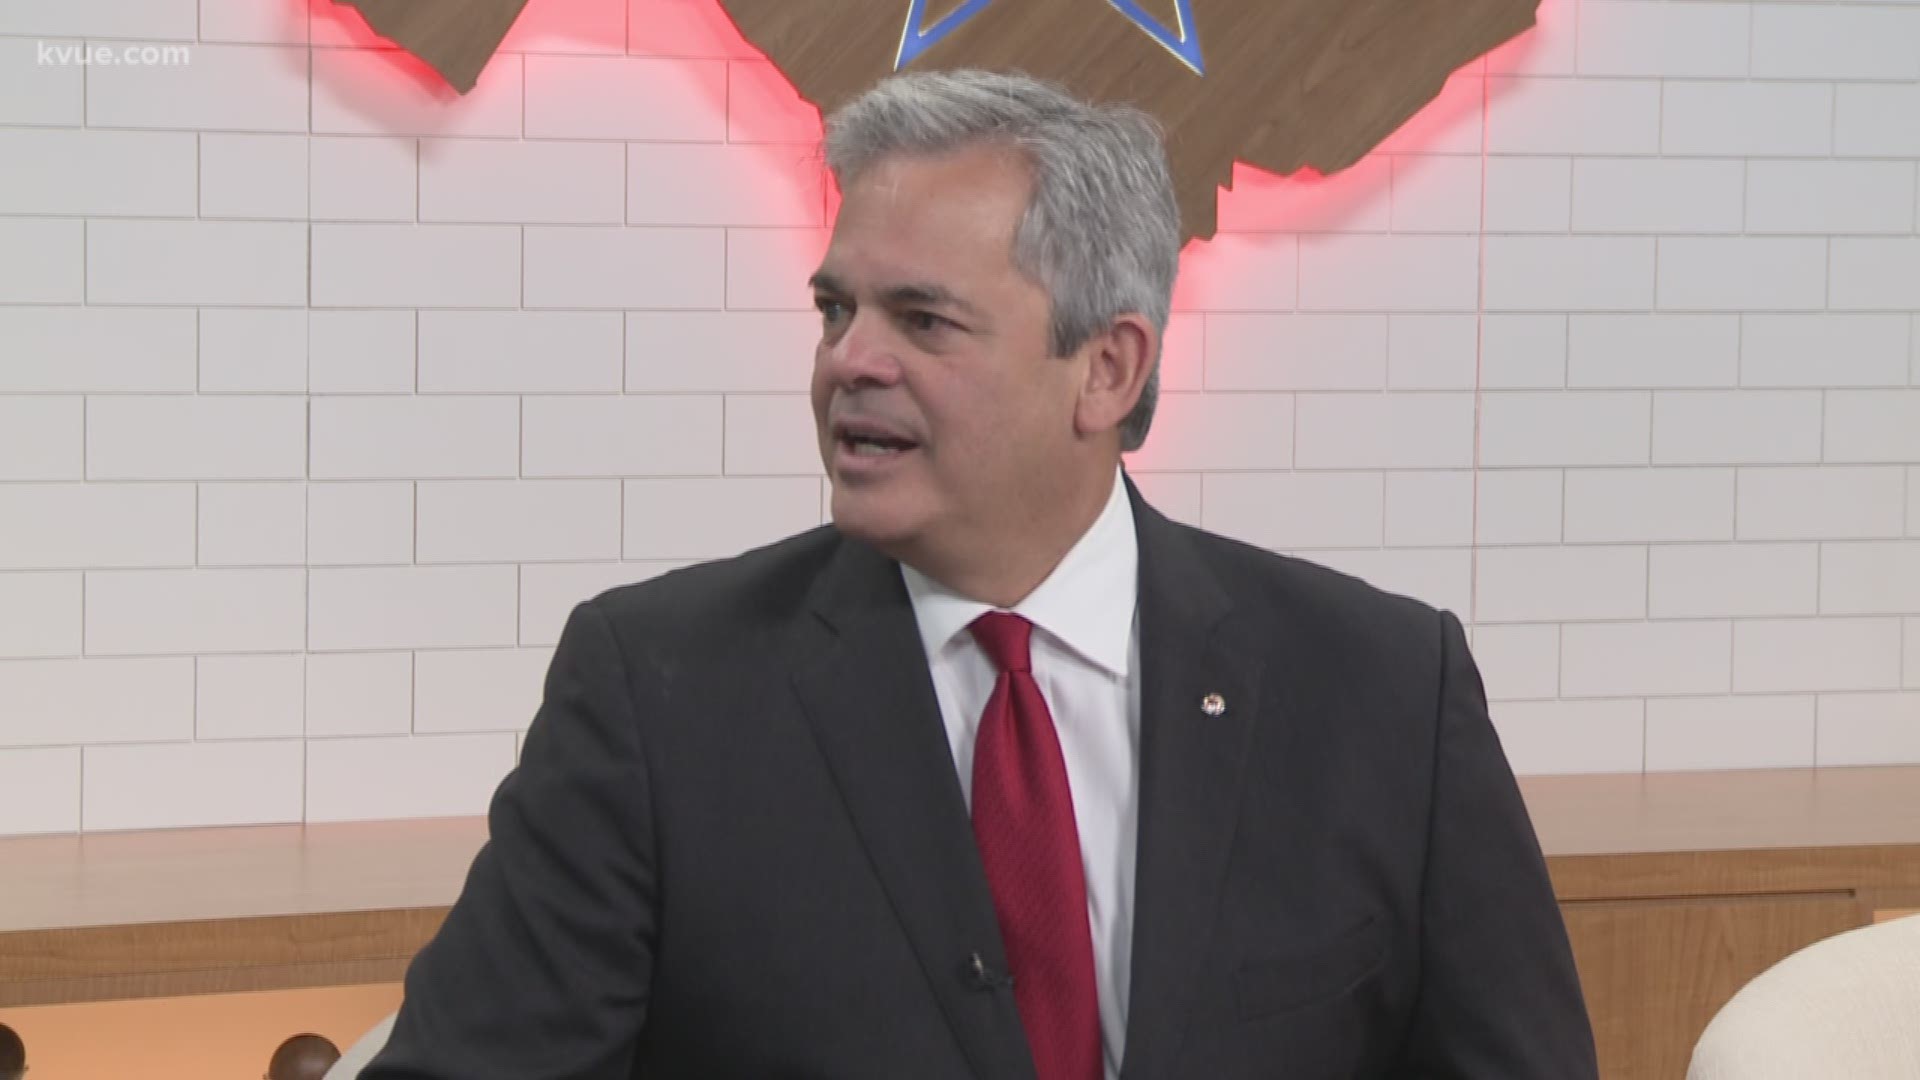 As Austin City Council members take their oaths of office, Mayor Steve Adler talks about city council's goals for the coming years.